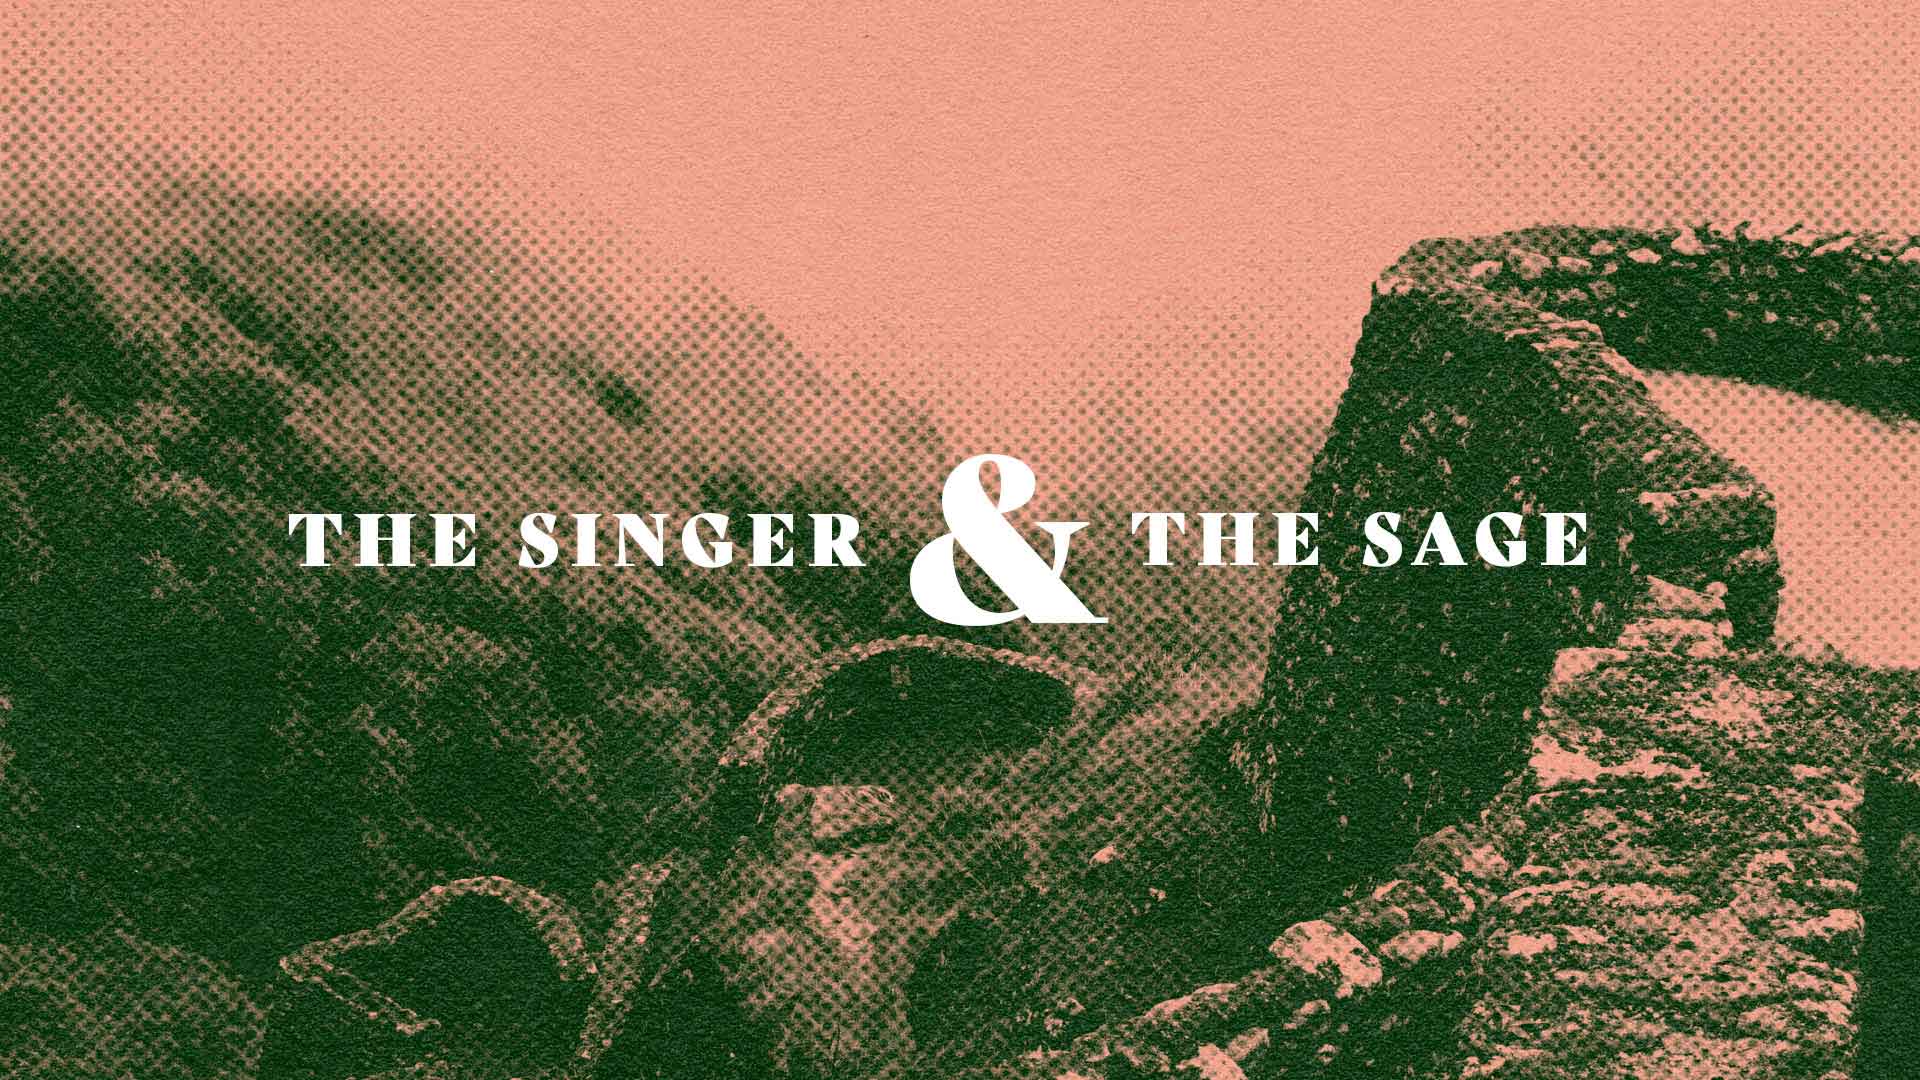 Series: The Singer & The Sage, Part 2